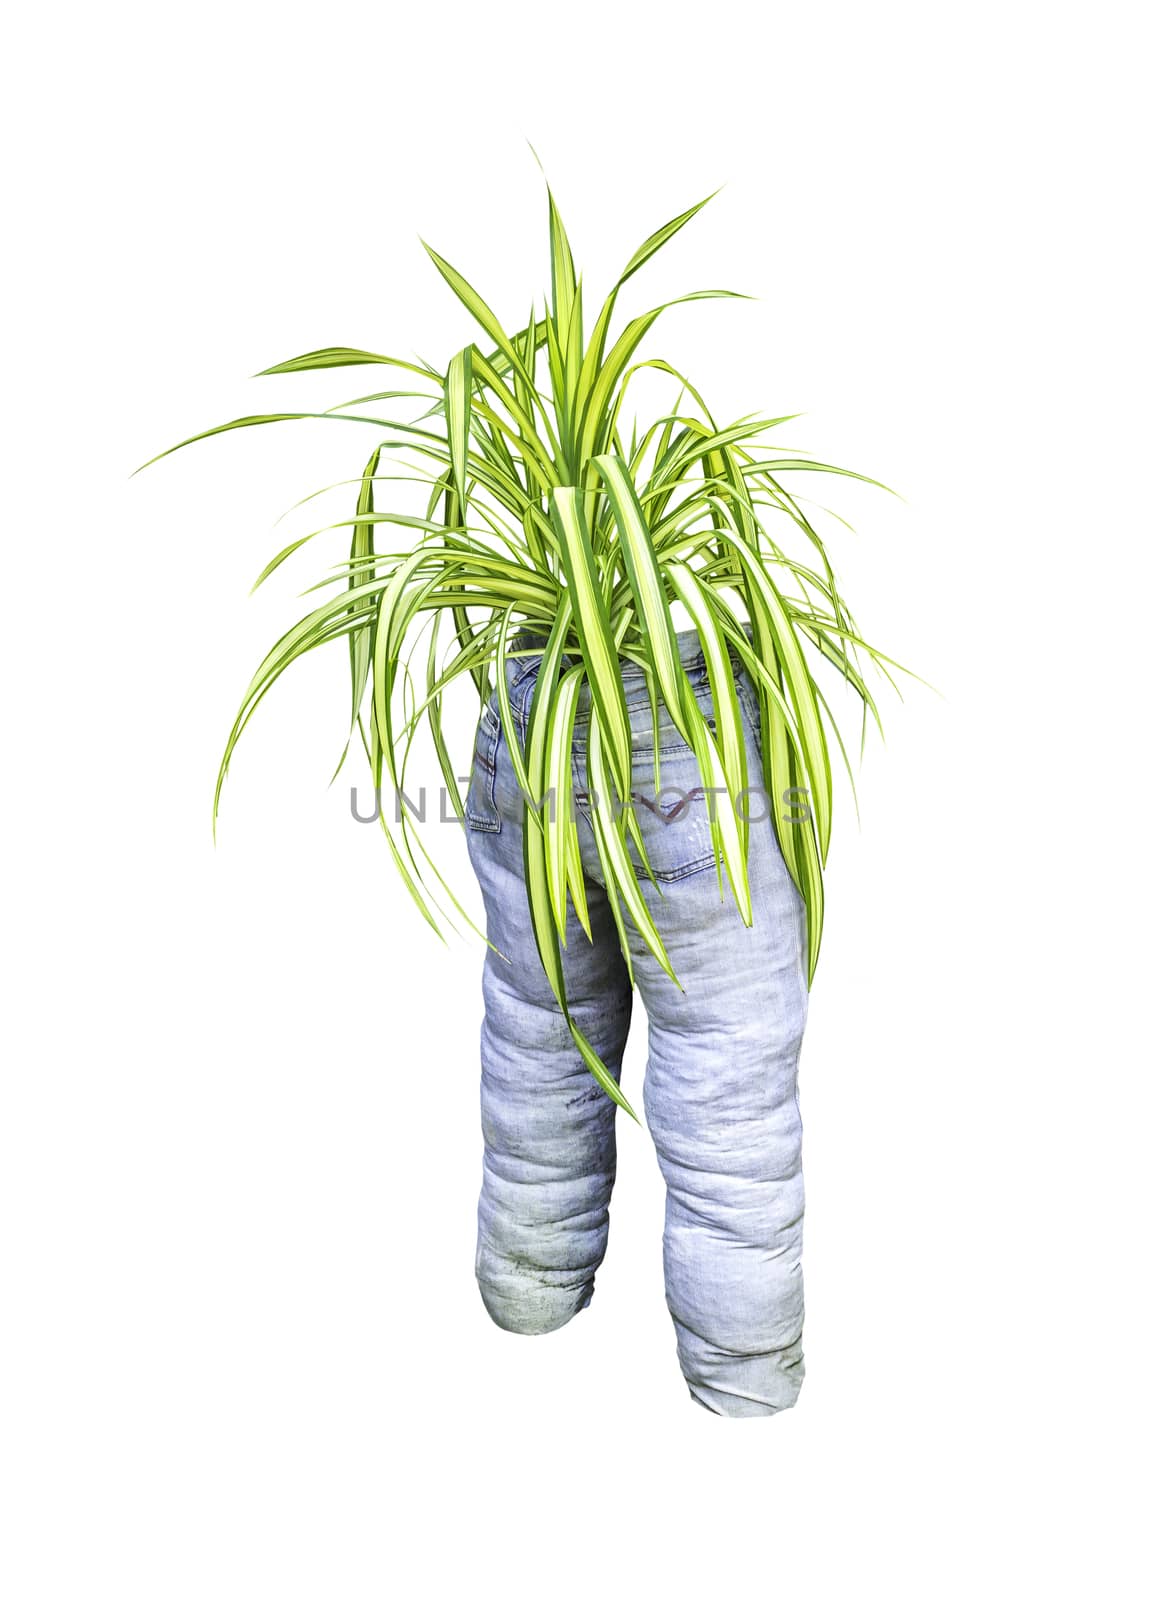 Green plant with old blue jeans isolated on white background